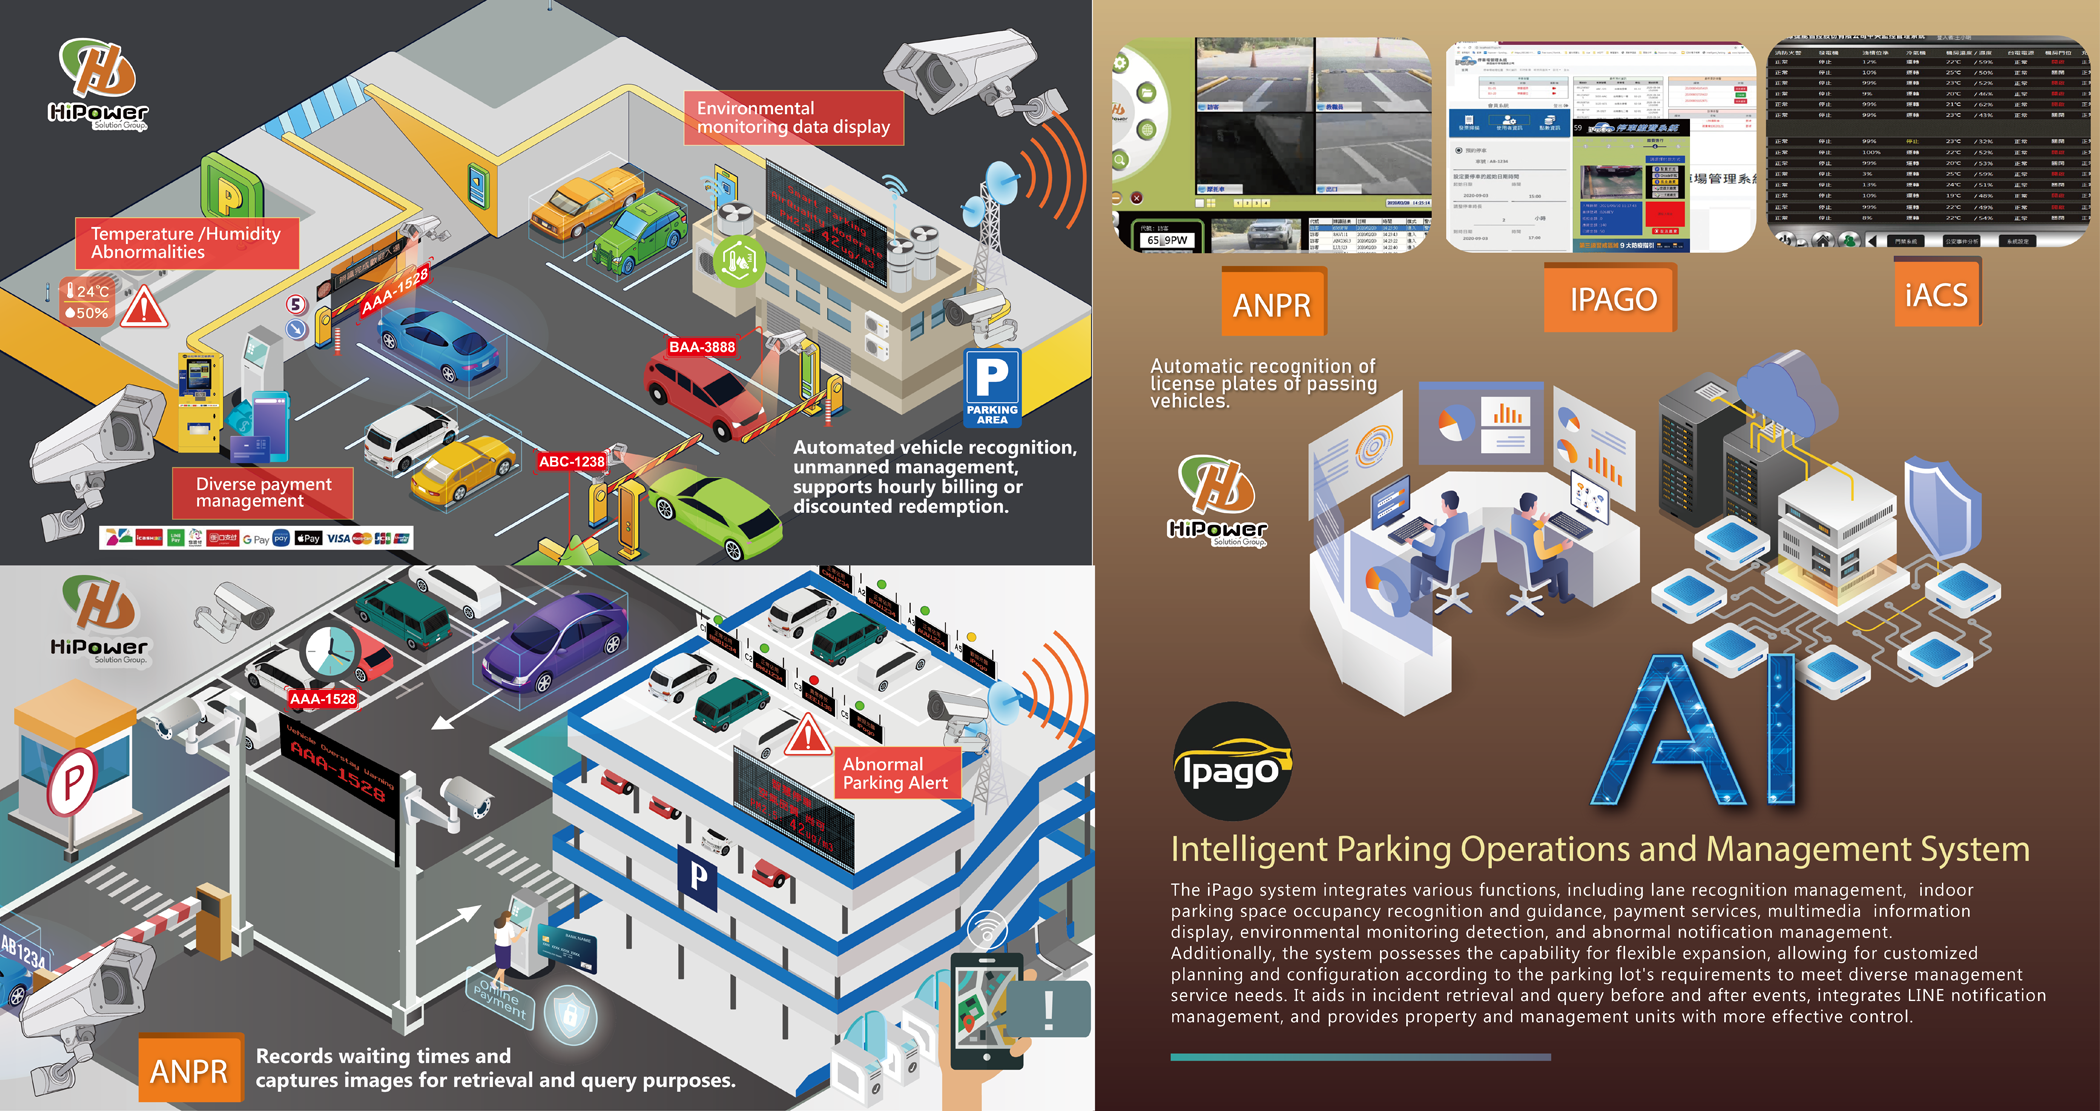 IPAGO Intelligent Parking Operations and Management System